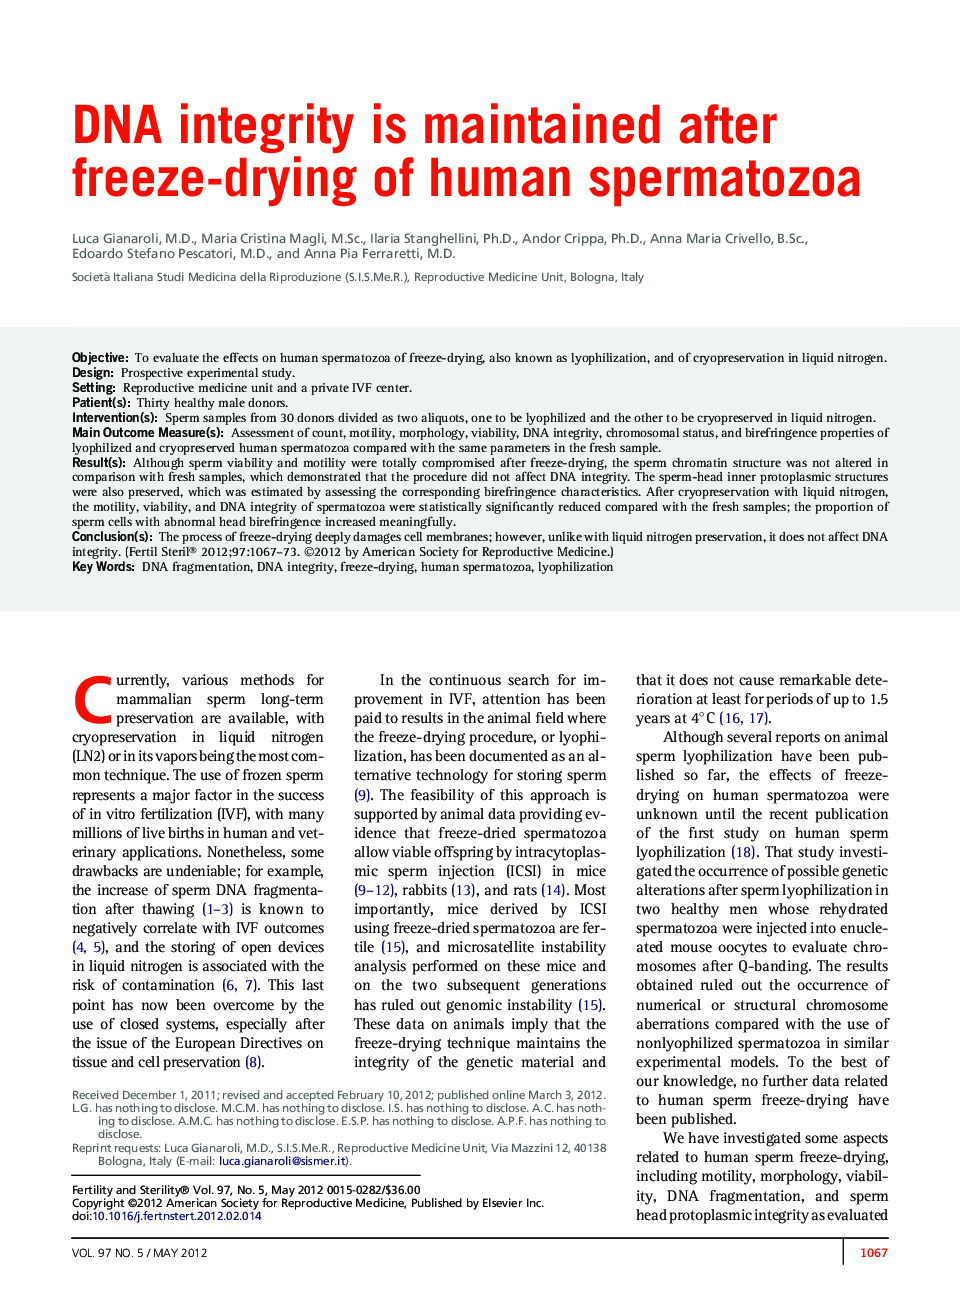 DNA integrity is maintained after freeze-drying of human spermatozoa